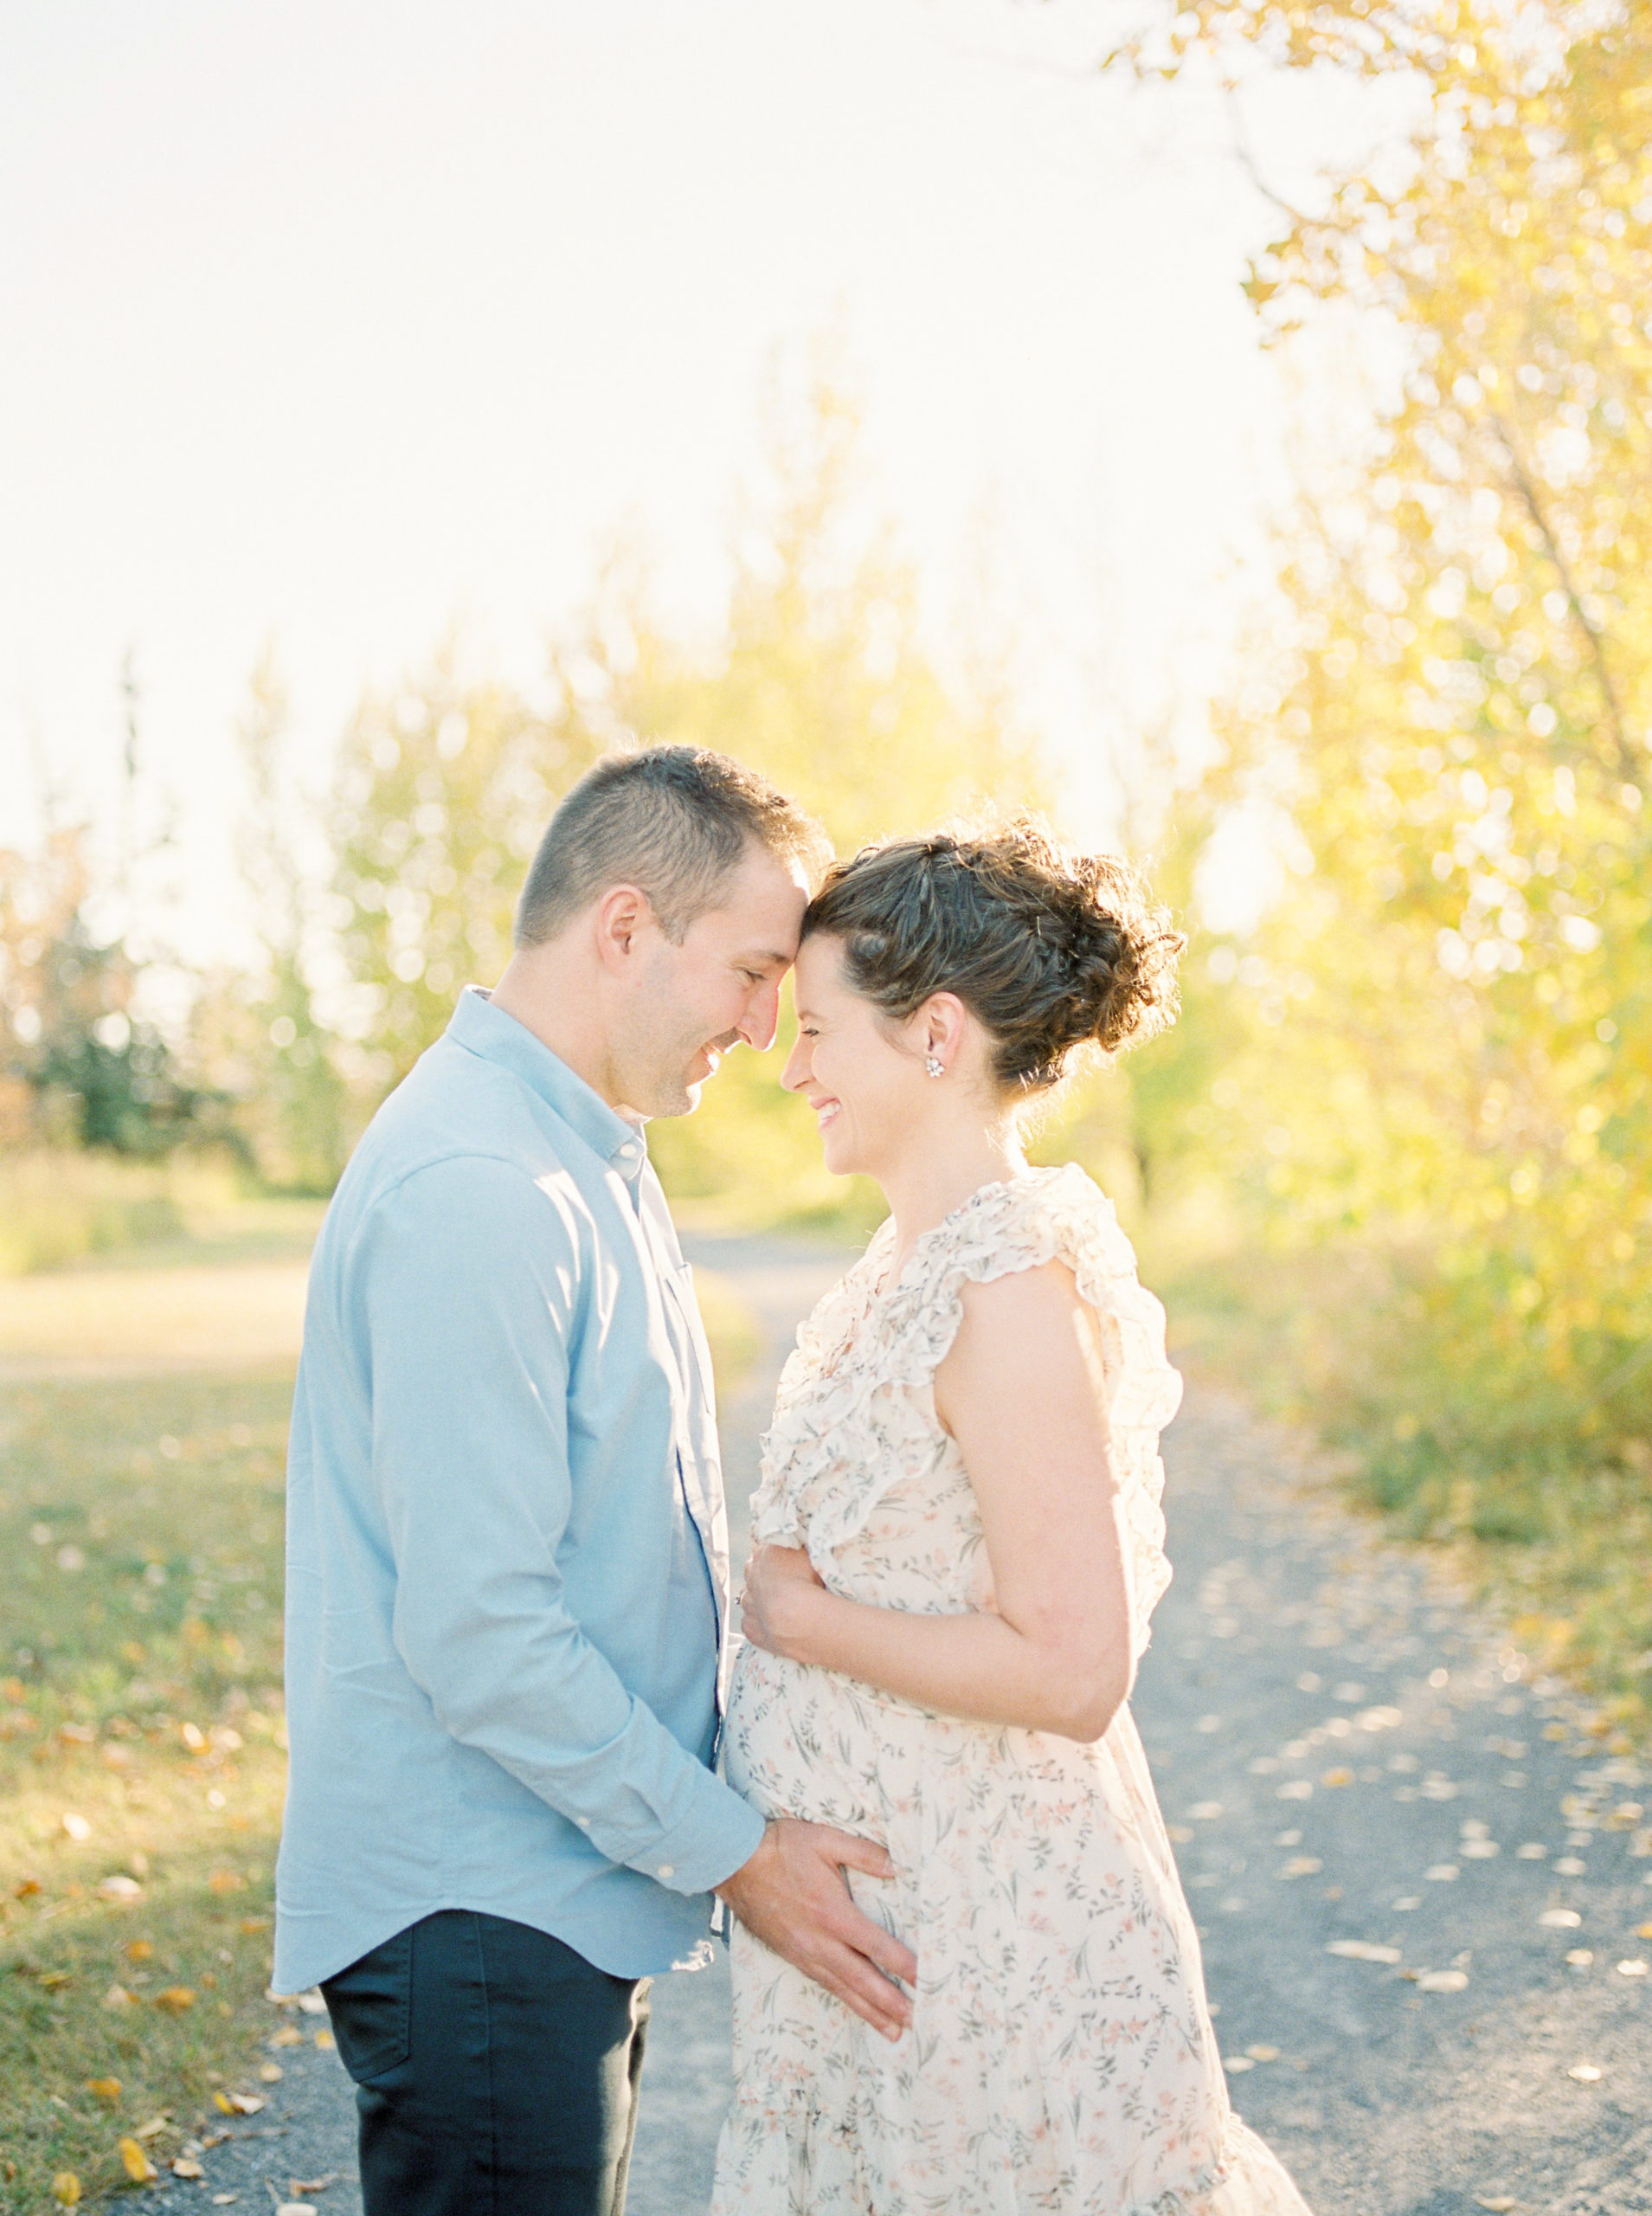 Edmonton Maternity Photographer capturing expectant parents in fall colours